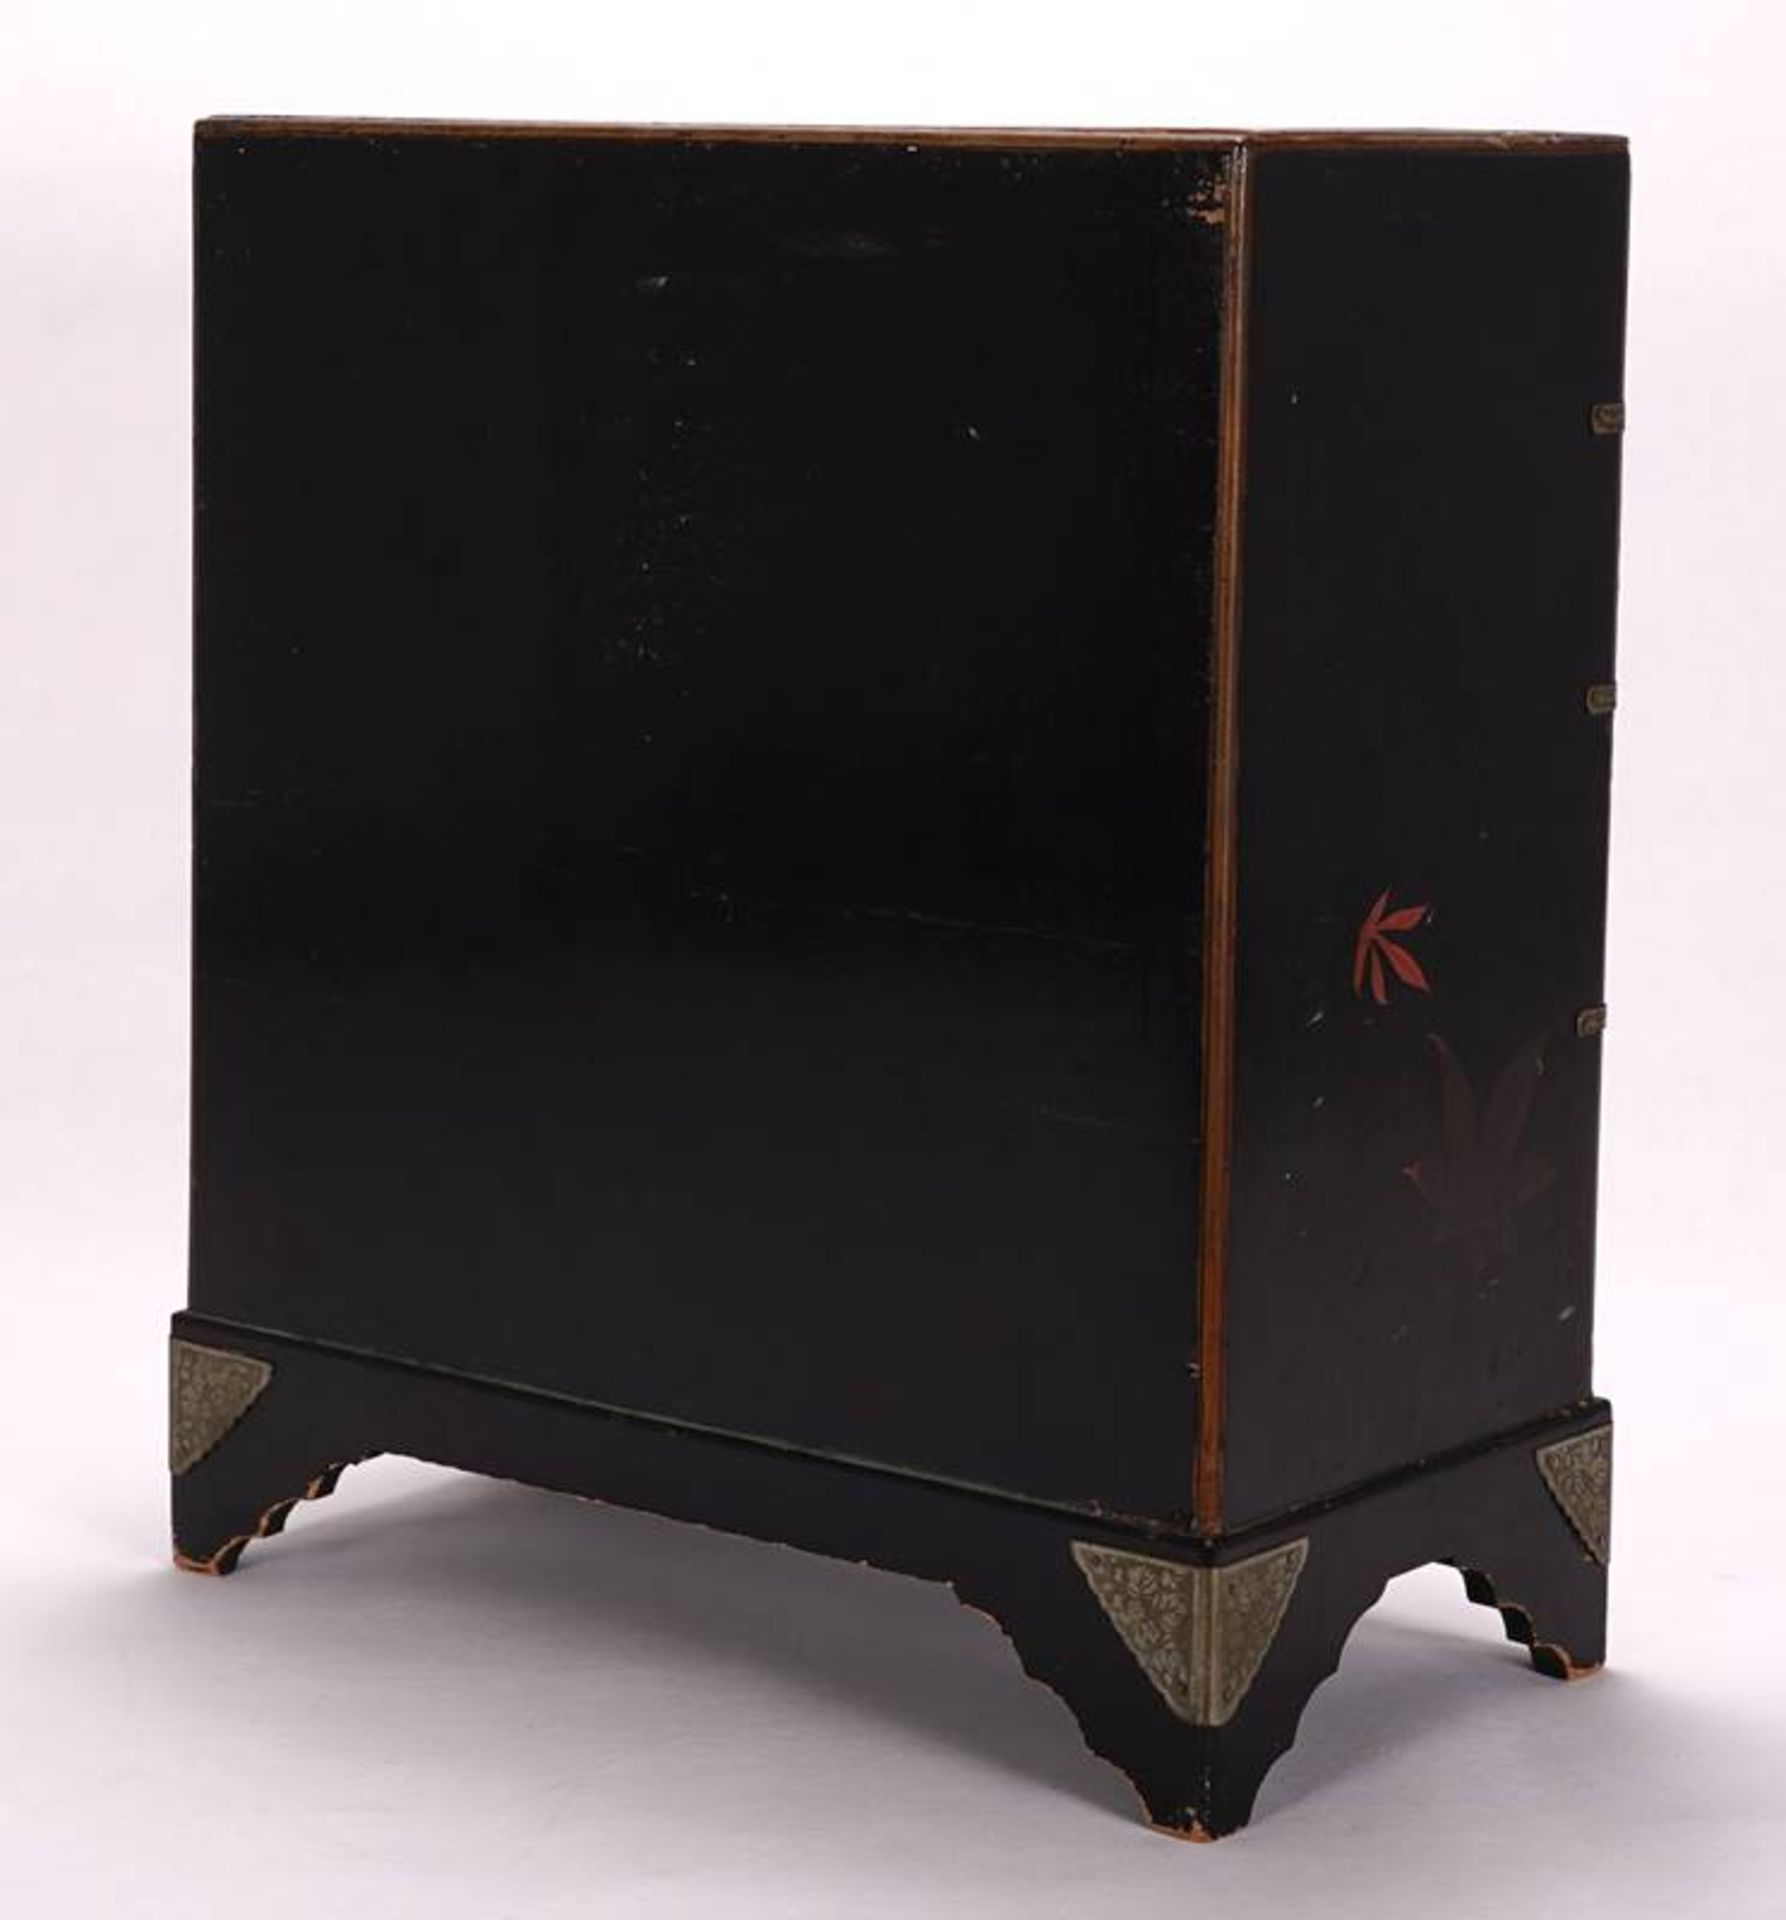 Japanese lacquer cabinet - Image 4 of 6